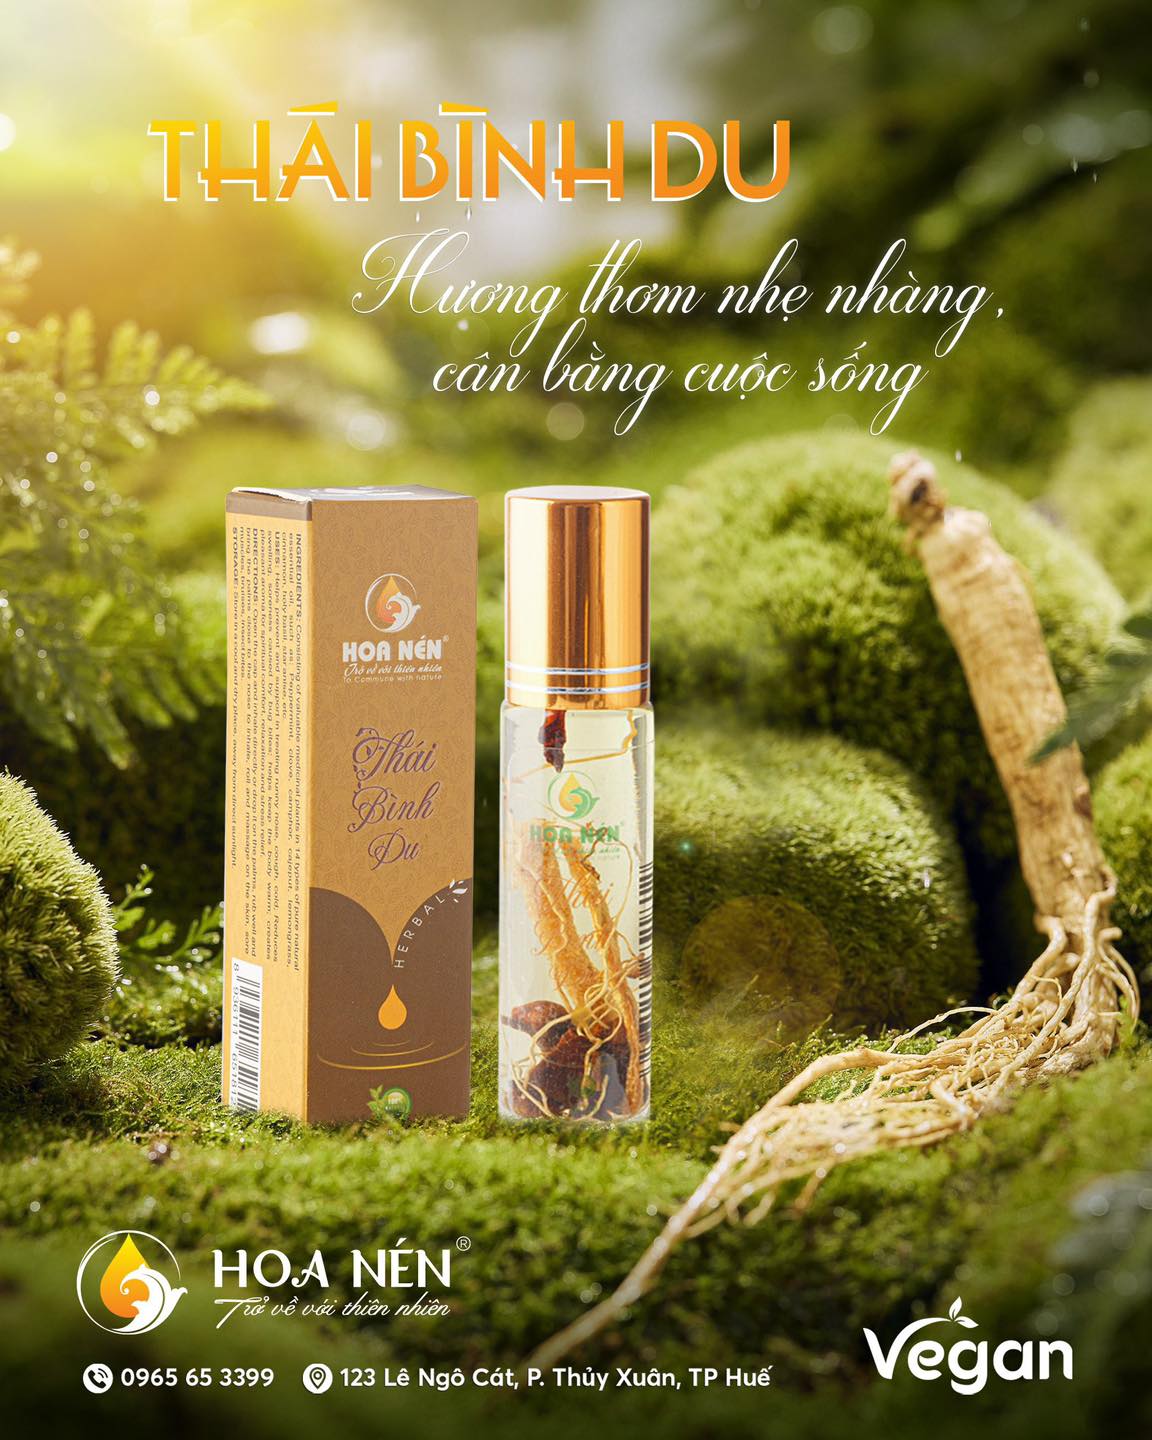 Tea tree oil, Hoa Nén, Essential oils, Vegan products, Thua Thien Hue, Cultural promotion, Local products, Organic farming, Health and wellness products